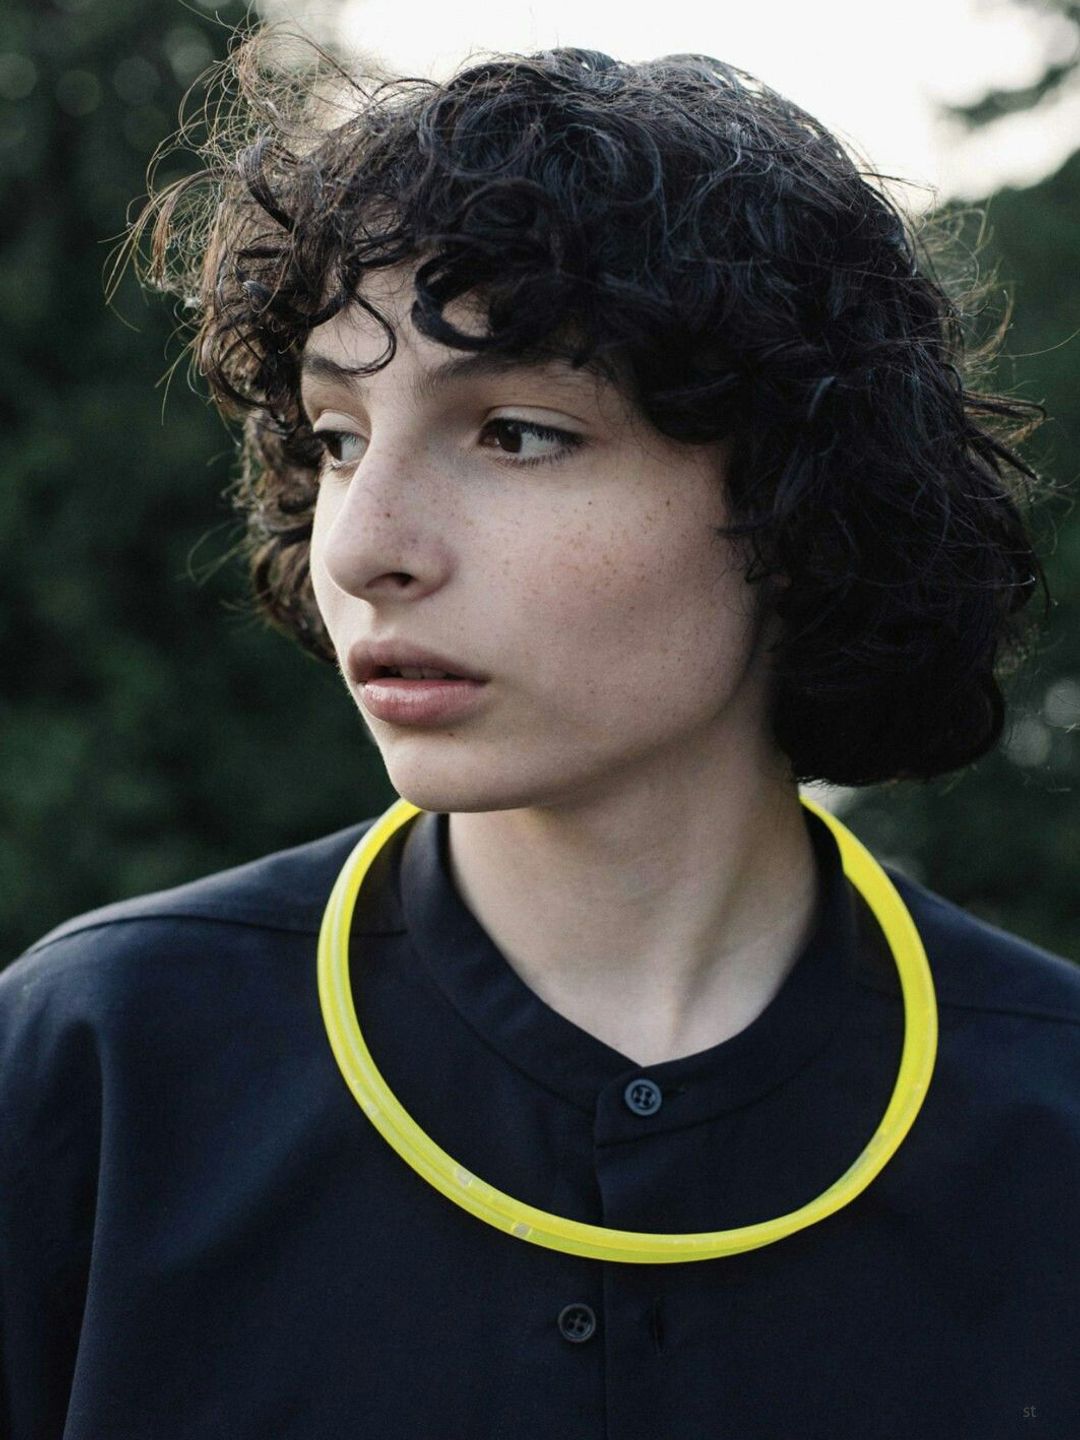 Finn Wolfhard in real life